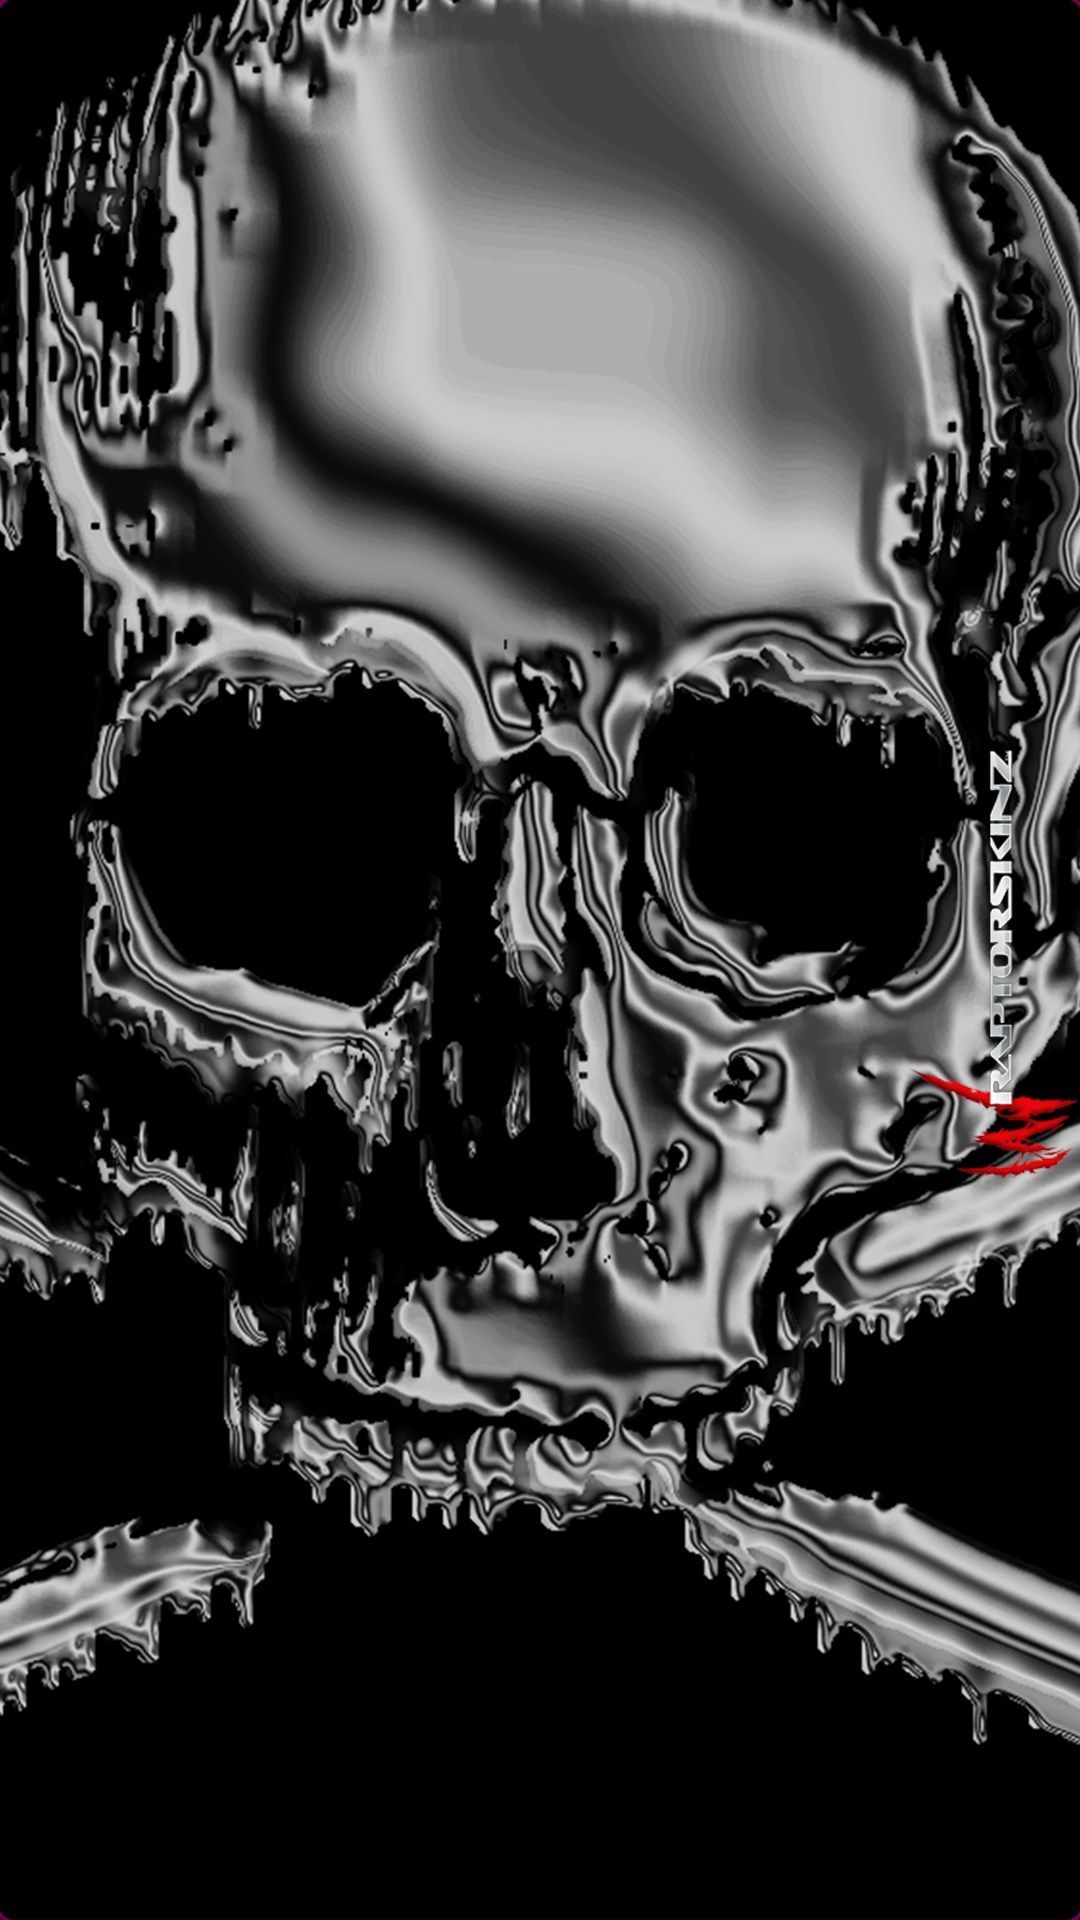 Skull Wallpaper Android   HD Wallpapers Backgrounds of